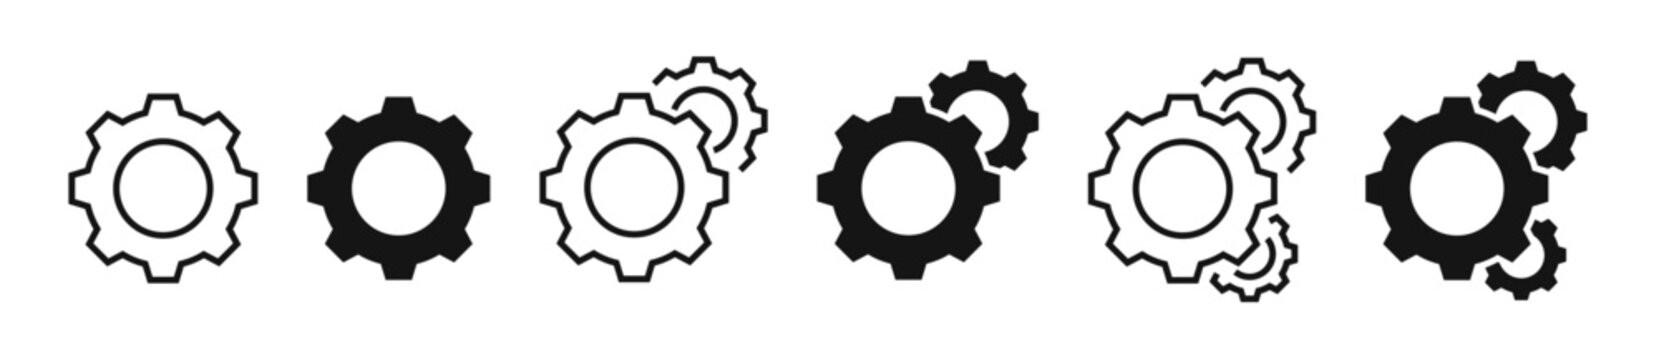 Gear wheel icon set. Gear vector icons. Gear icon set. Settings, configuration concept icons. Gear settings. Cogwheel icon collection. Vector EPS 10